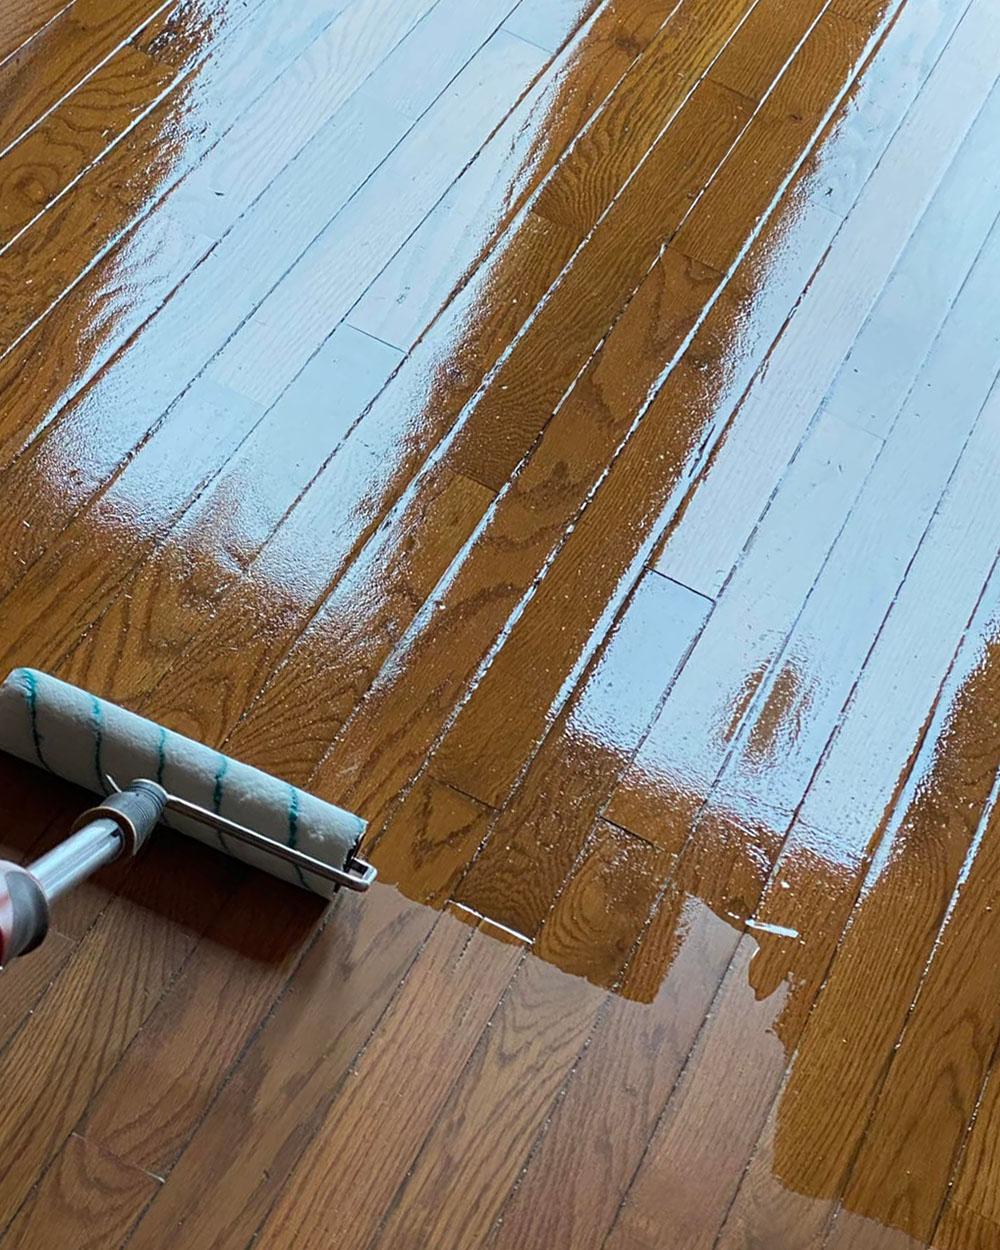 Hardwood Cleaning Process Hardwood Floor Refinishing in St Louis MO, O'fallon IL, and Surrounding Areas